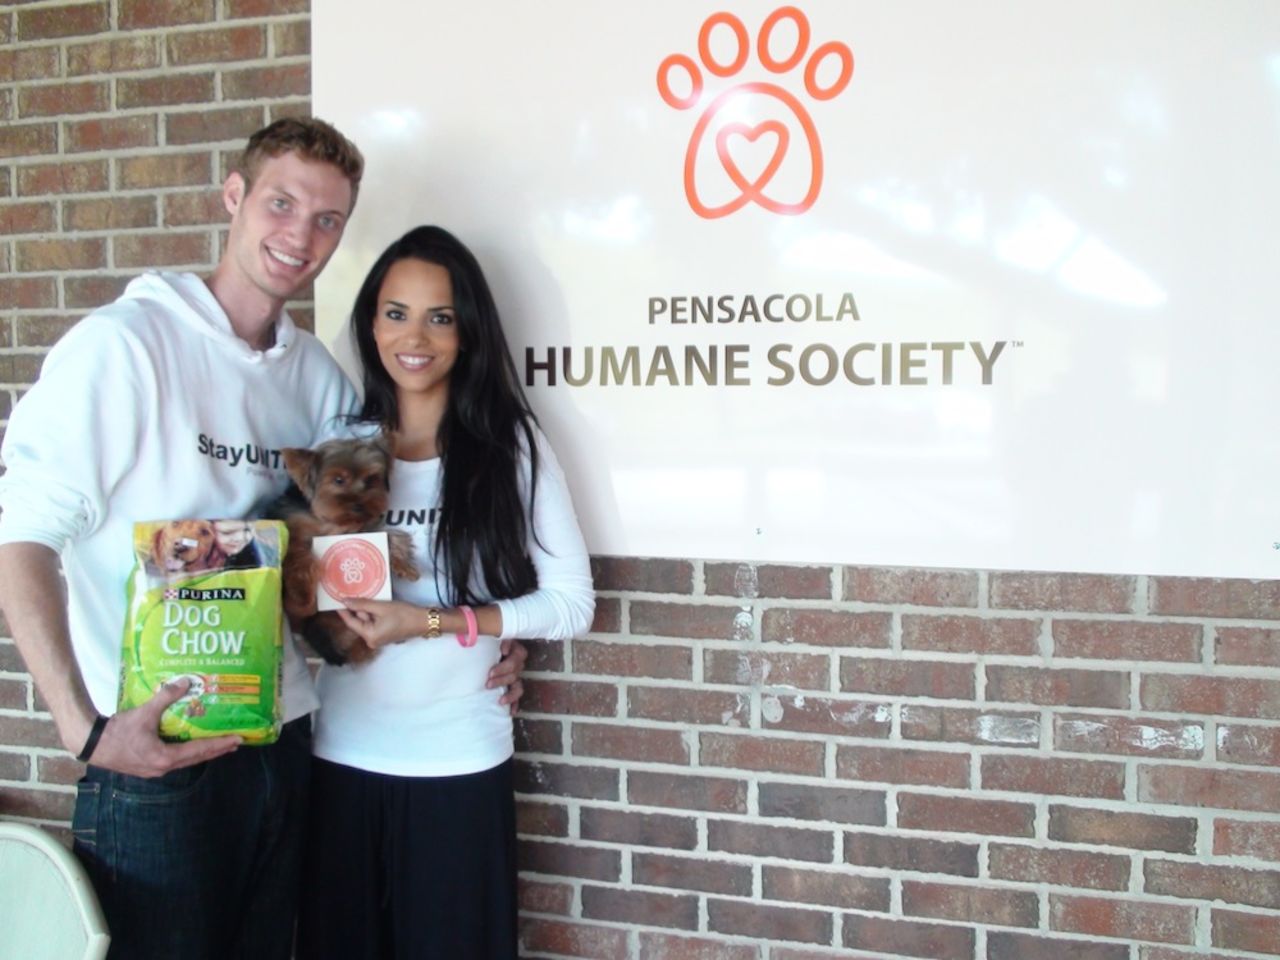 In Florida, the Svenssons made a donation to the Pensacola Humane Society and also spent time at an animal hospital.  